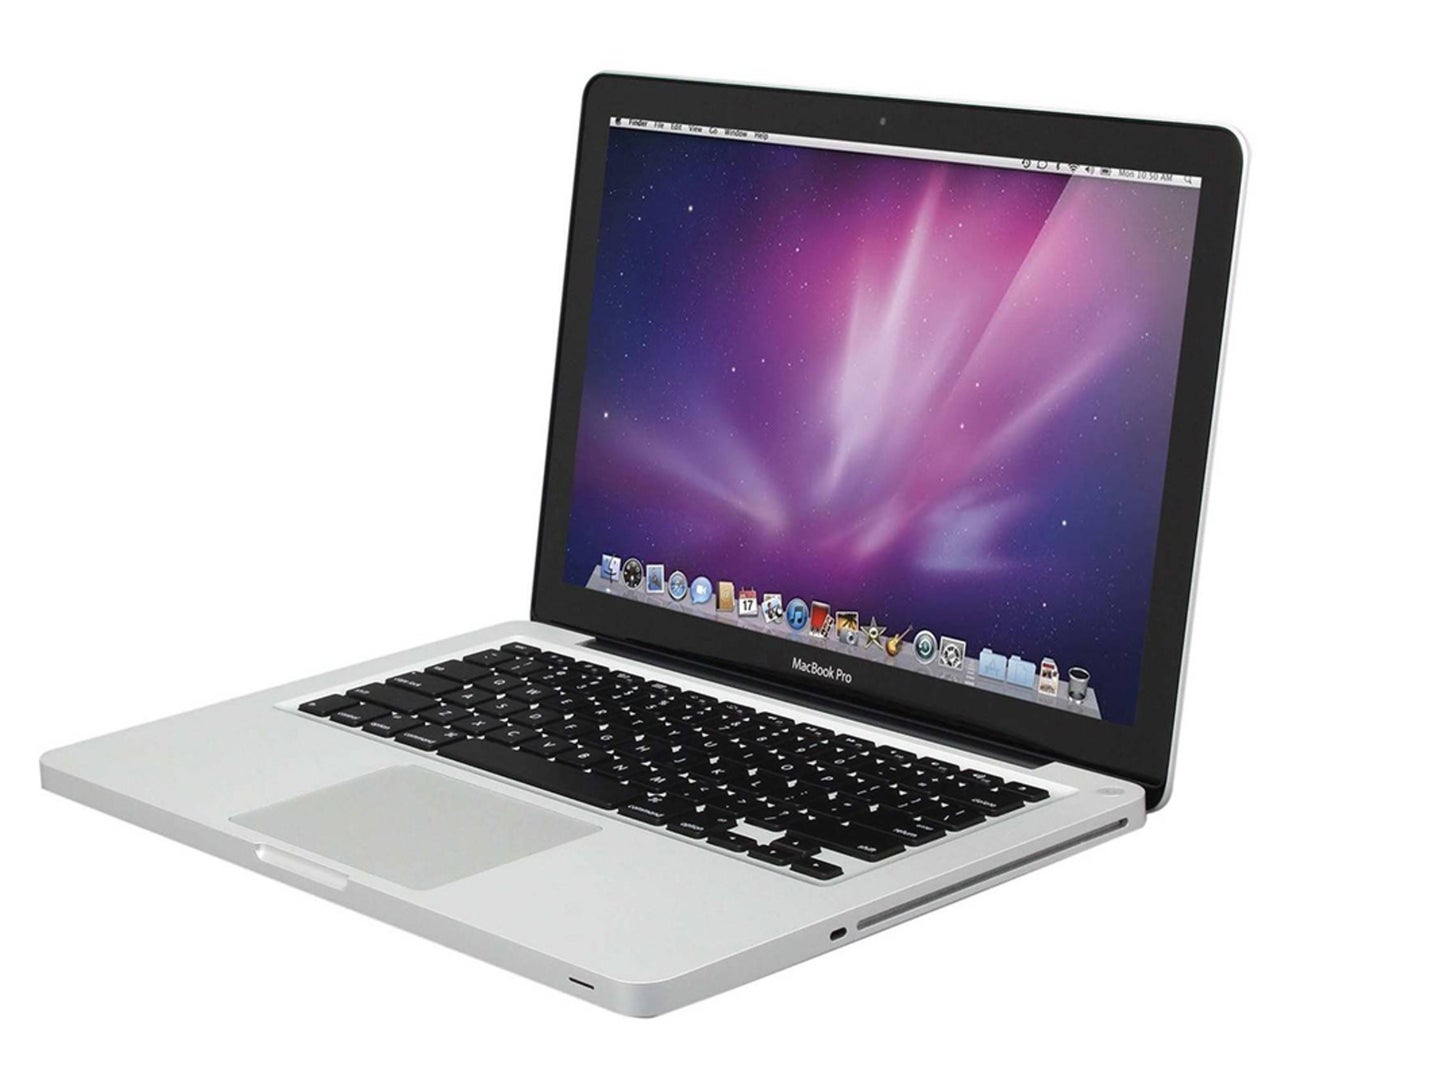 A 2012 MacBook Pro on a white background